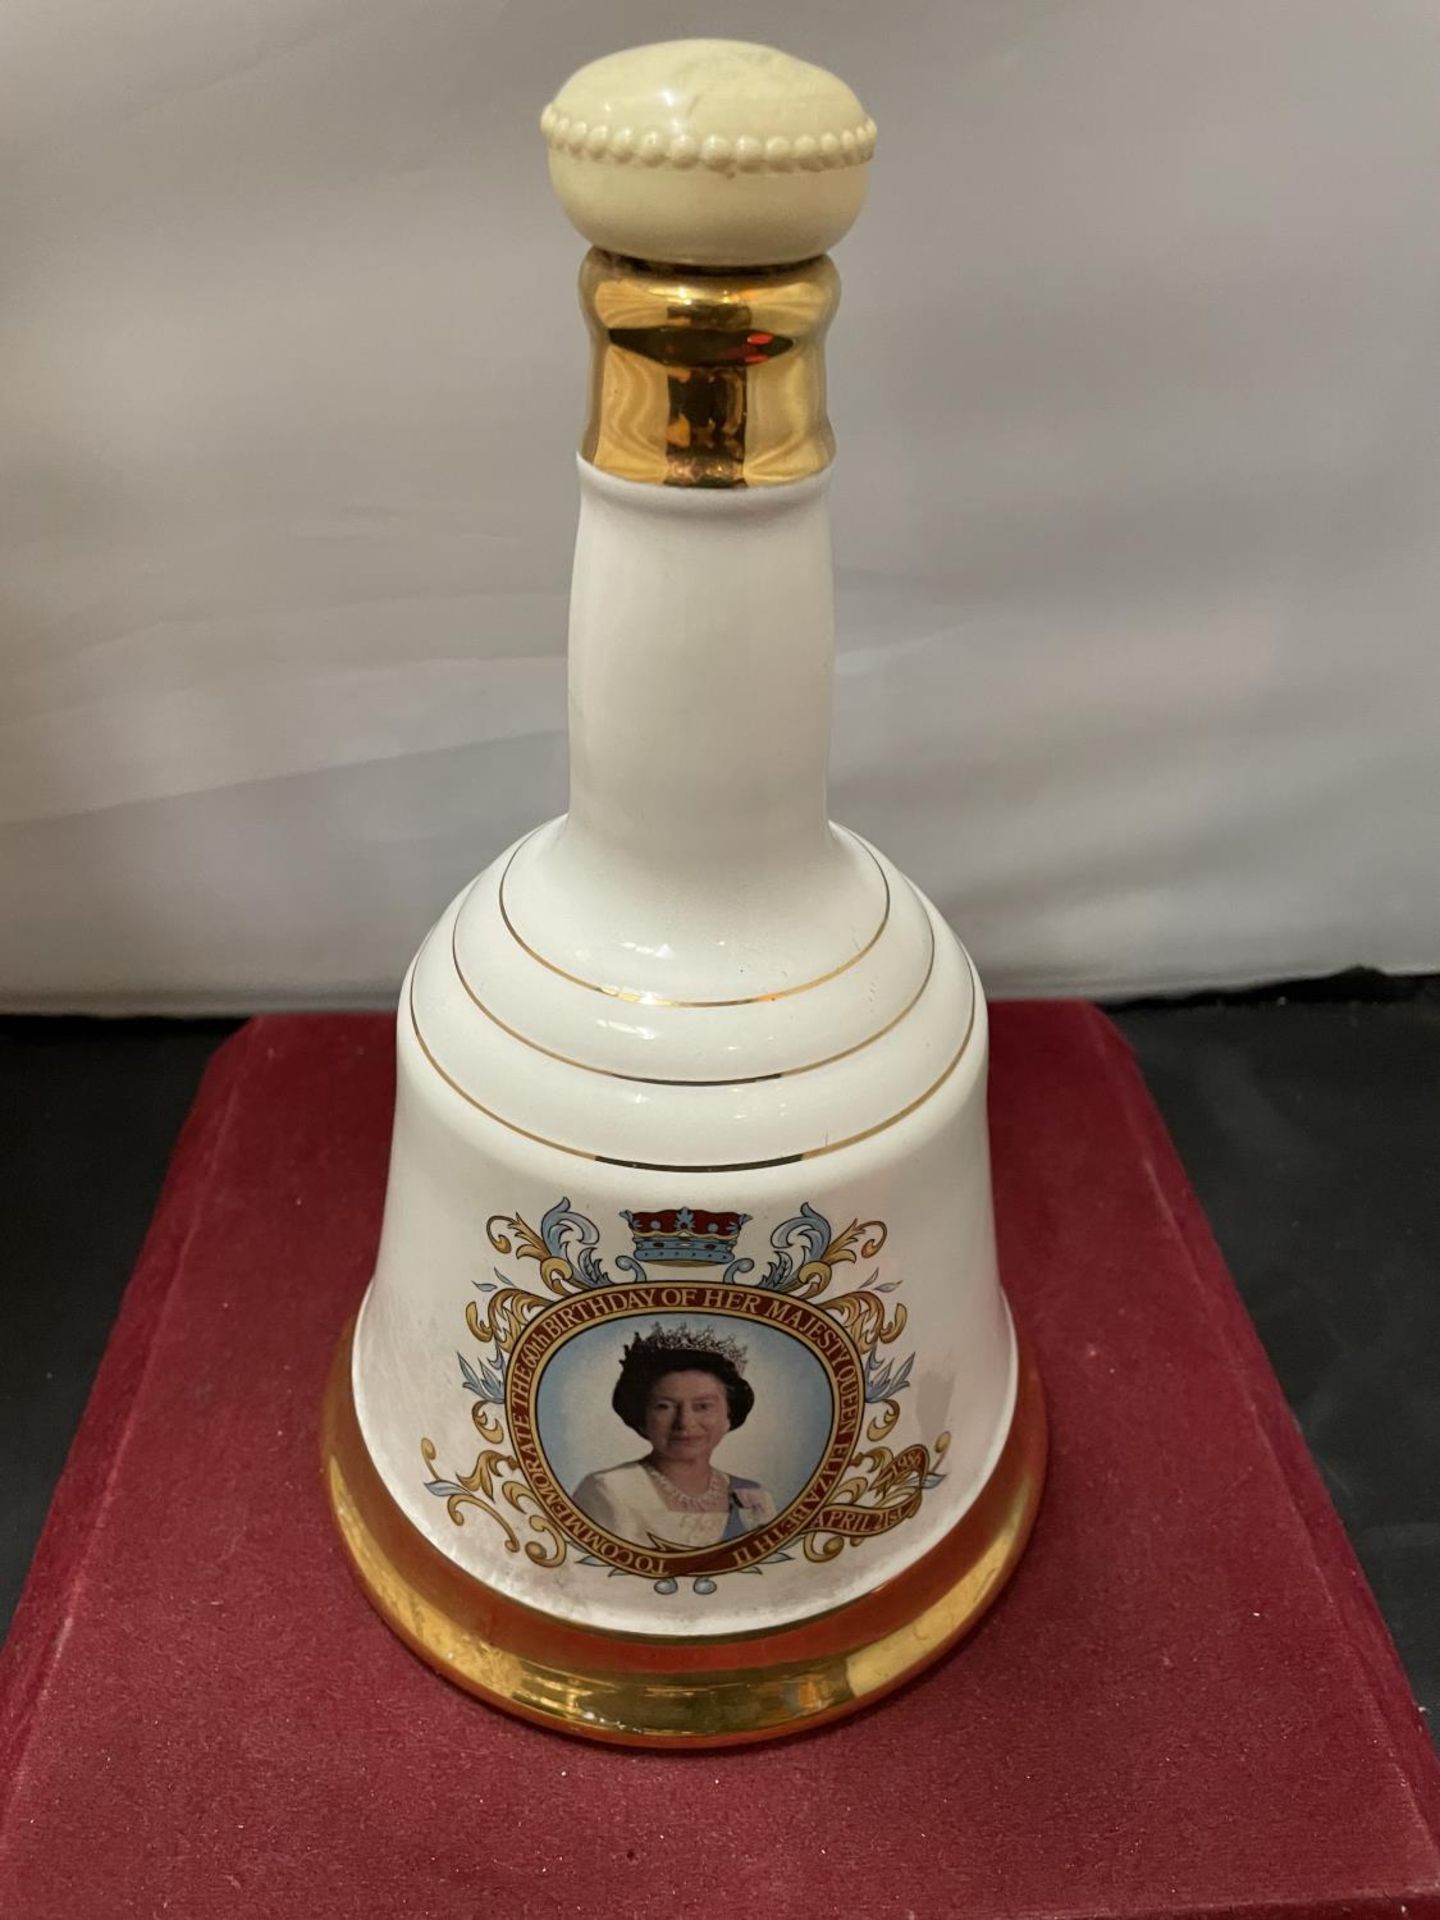 A 75 CL DECANTER OF BELLS TO COMMEMORATE THE 60TH BIRTHDAY OF QUEEN ELIZEBETH II